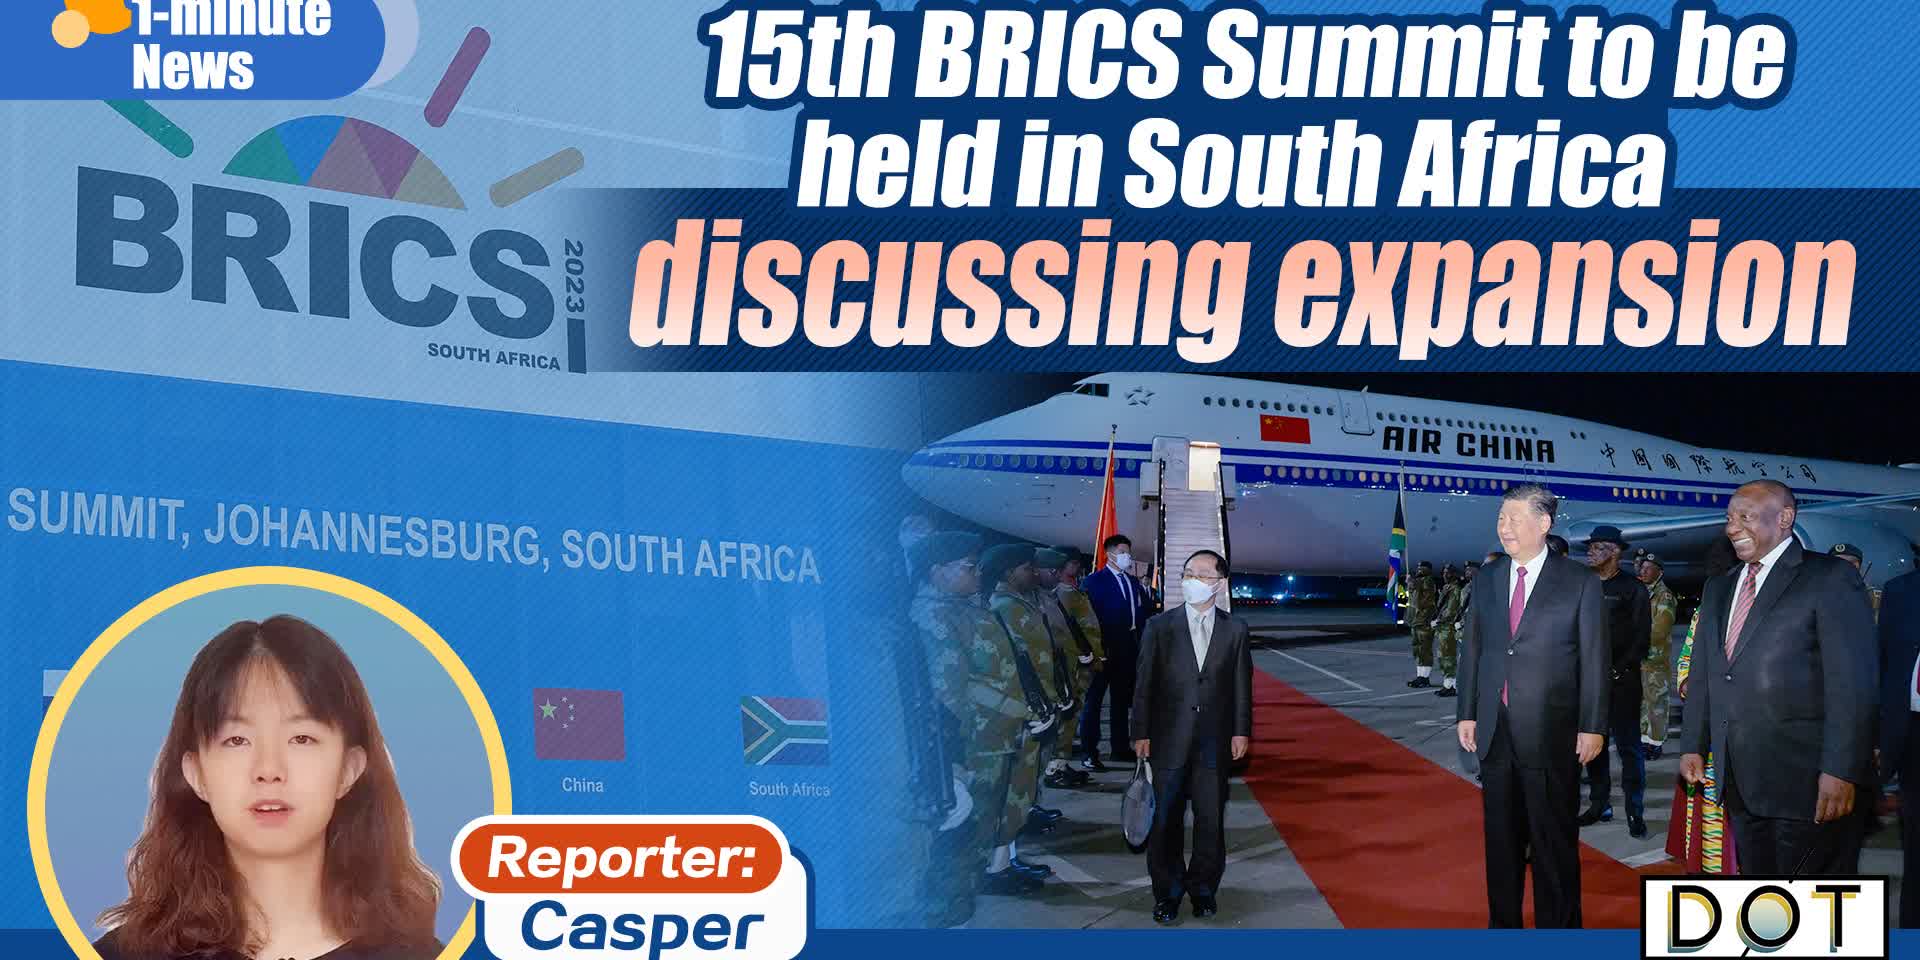 1-minute News | 15th BRICS Summit to be held in South Africa, discussing expansion